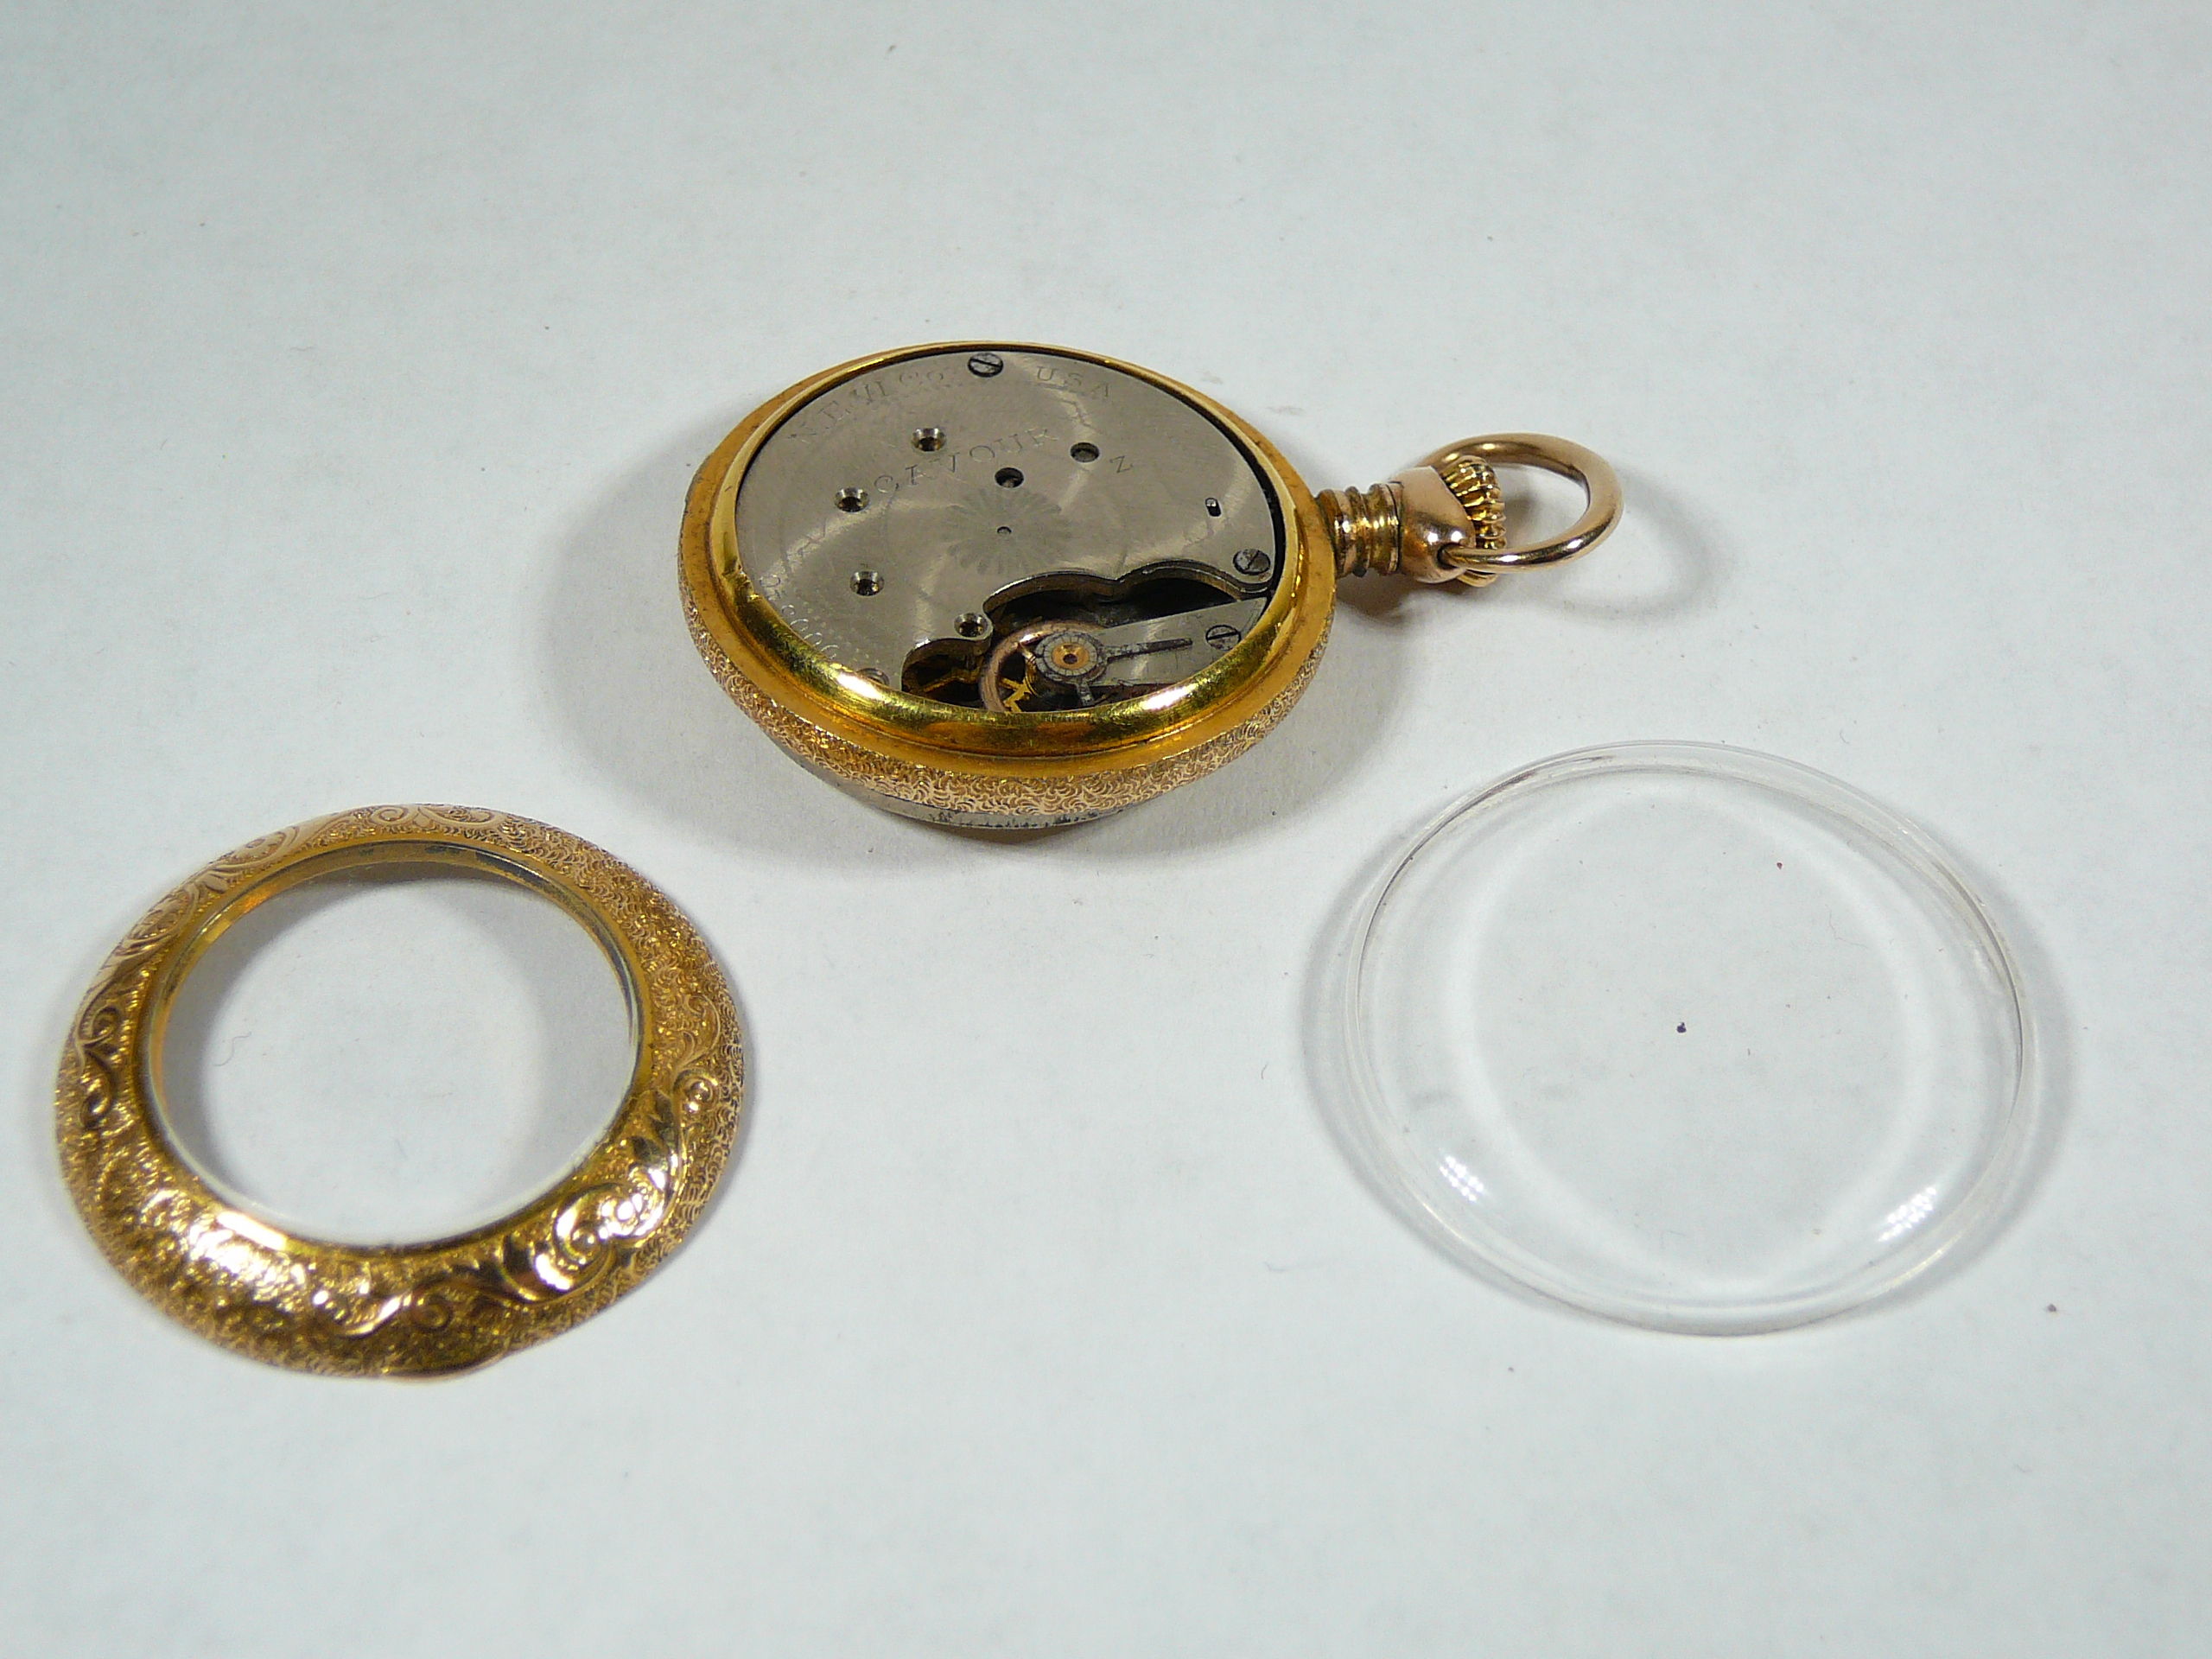 Ladies New England Antique Fob Watch - Image 2 of 2